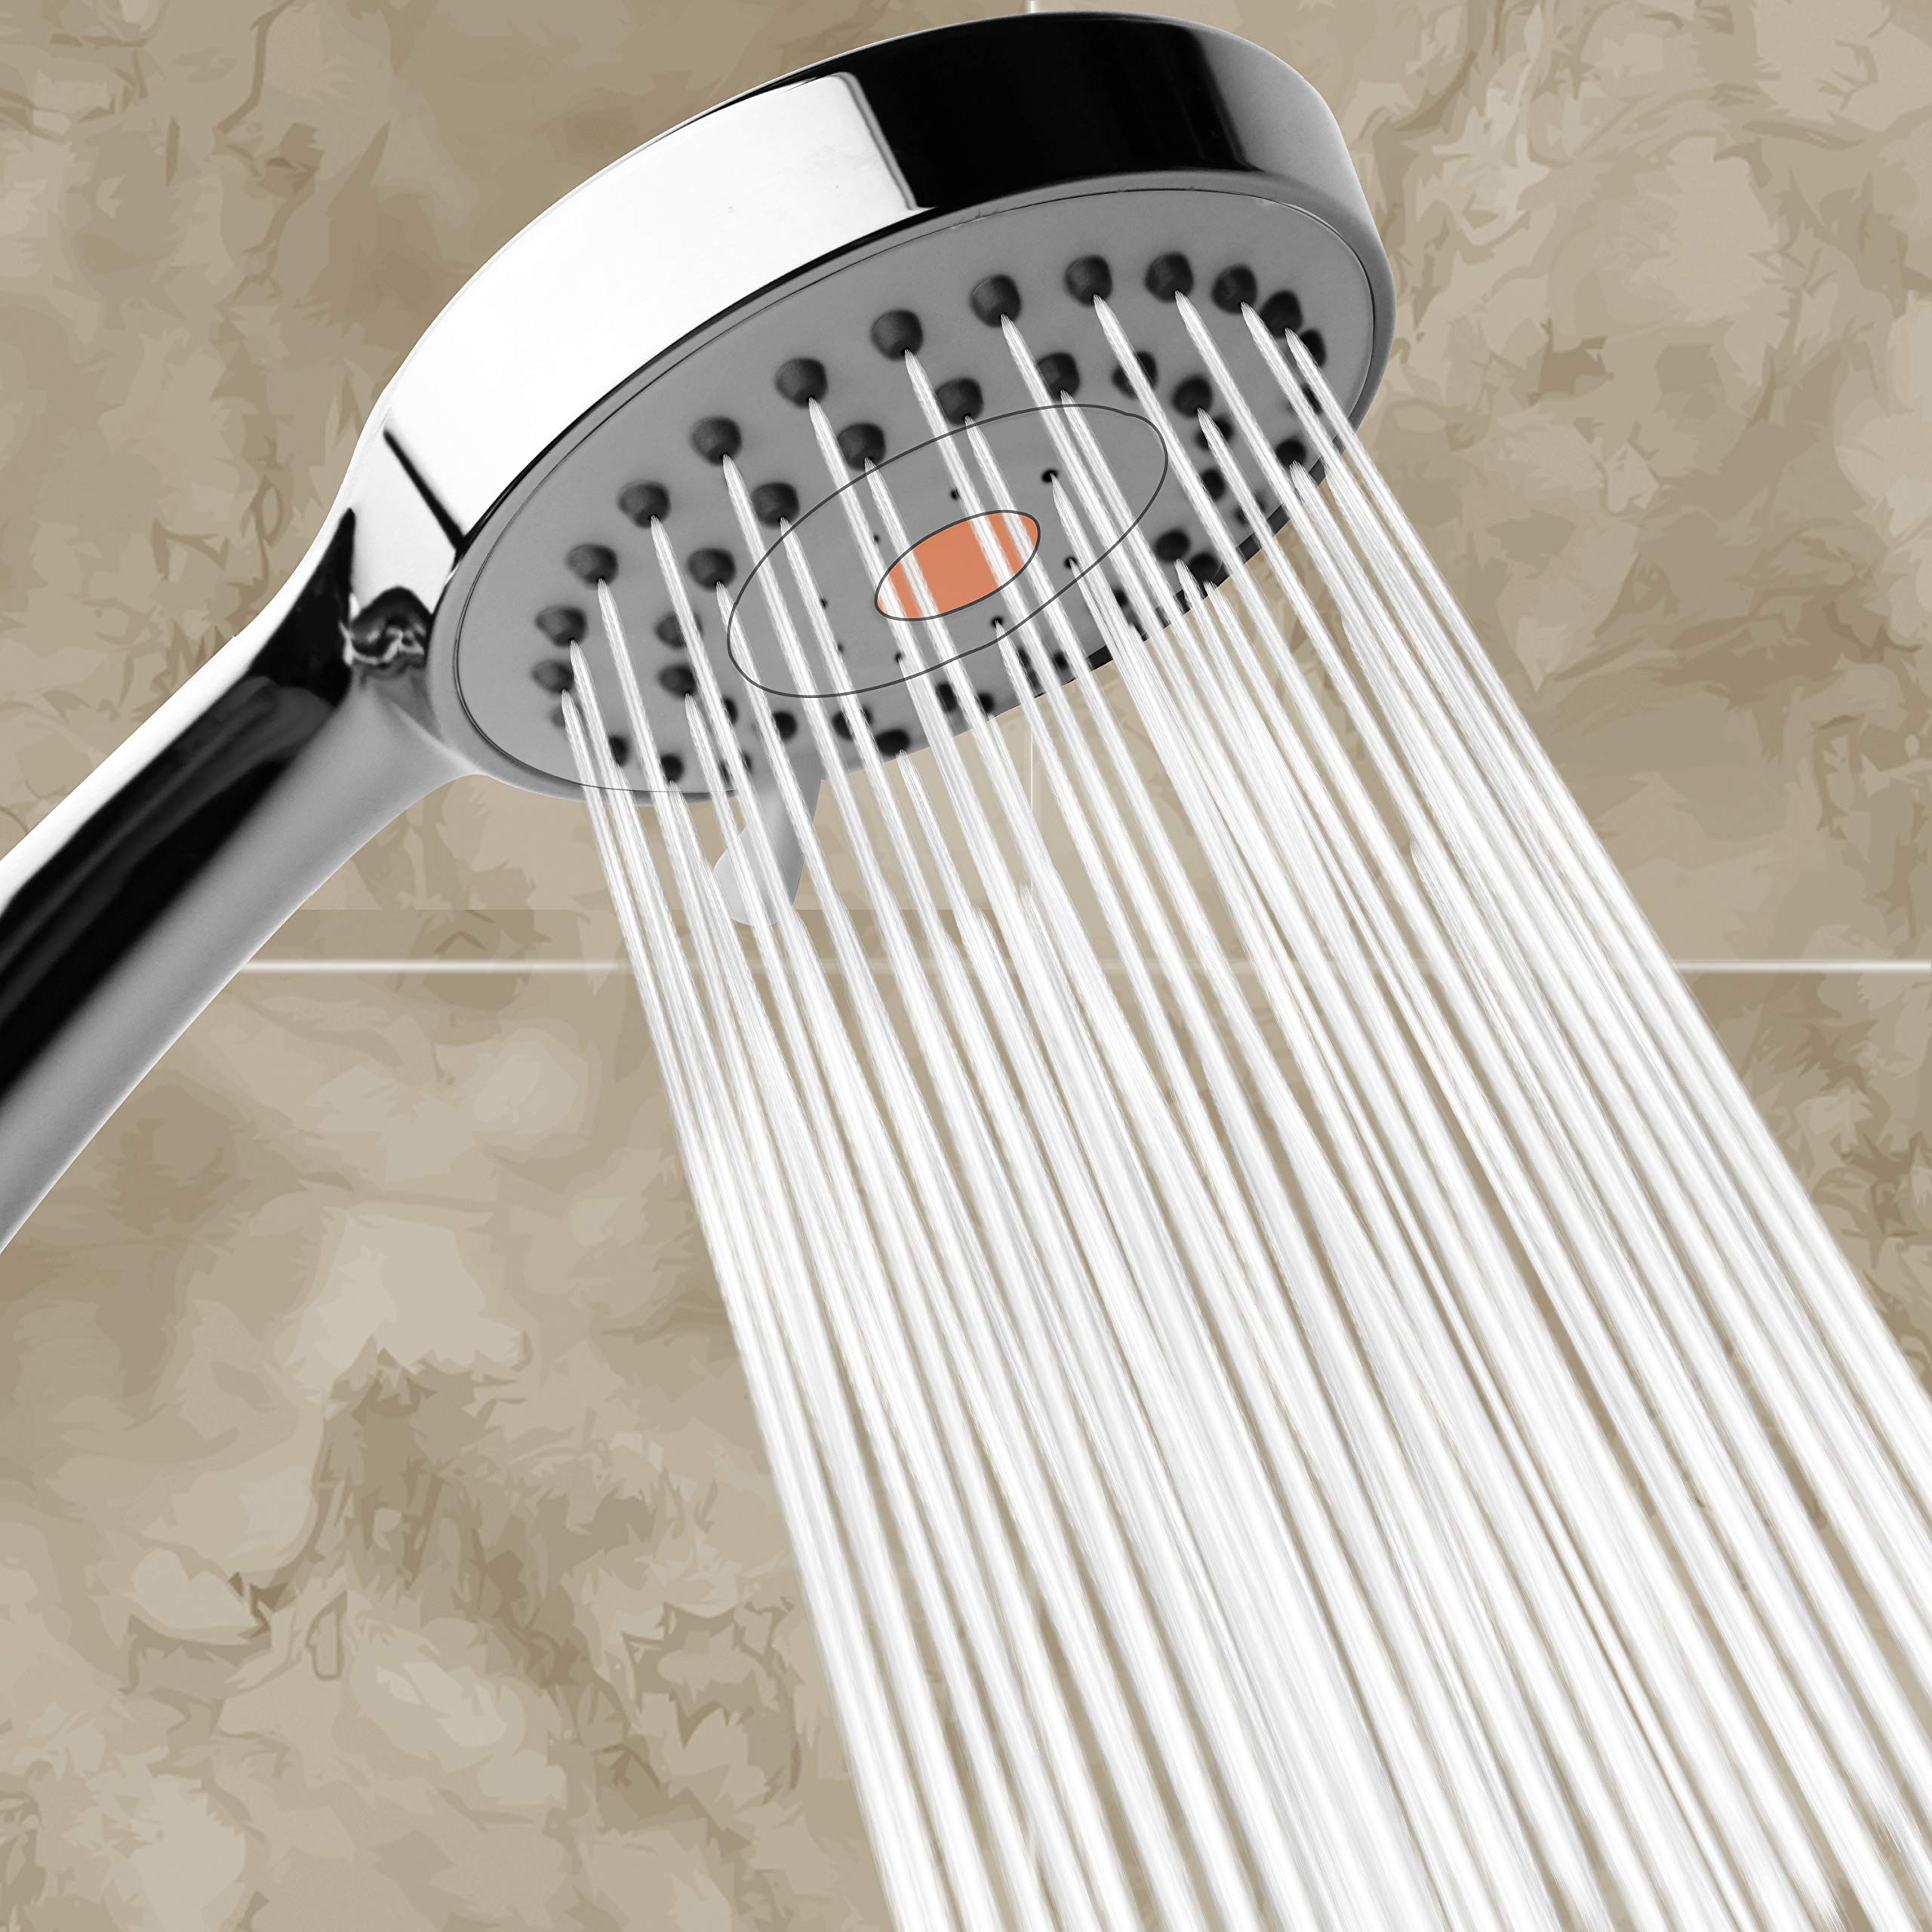 HO2ME High Pressure Handheld Shower Head with Powerful Shower Spray against Low Pressure Water Supply Pipeline, Multi-functions, w/ 79 inch Hose, Bracket, Flow Regulator, Chrome Finish